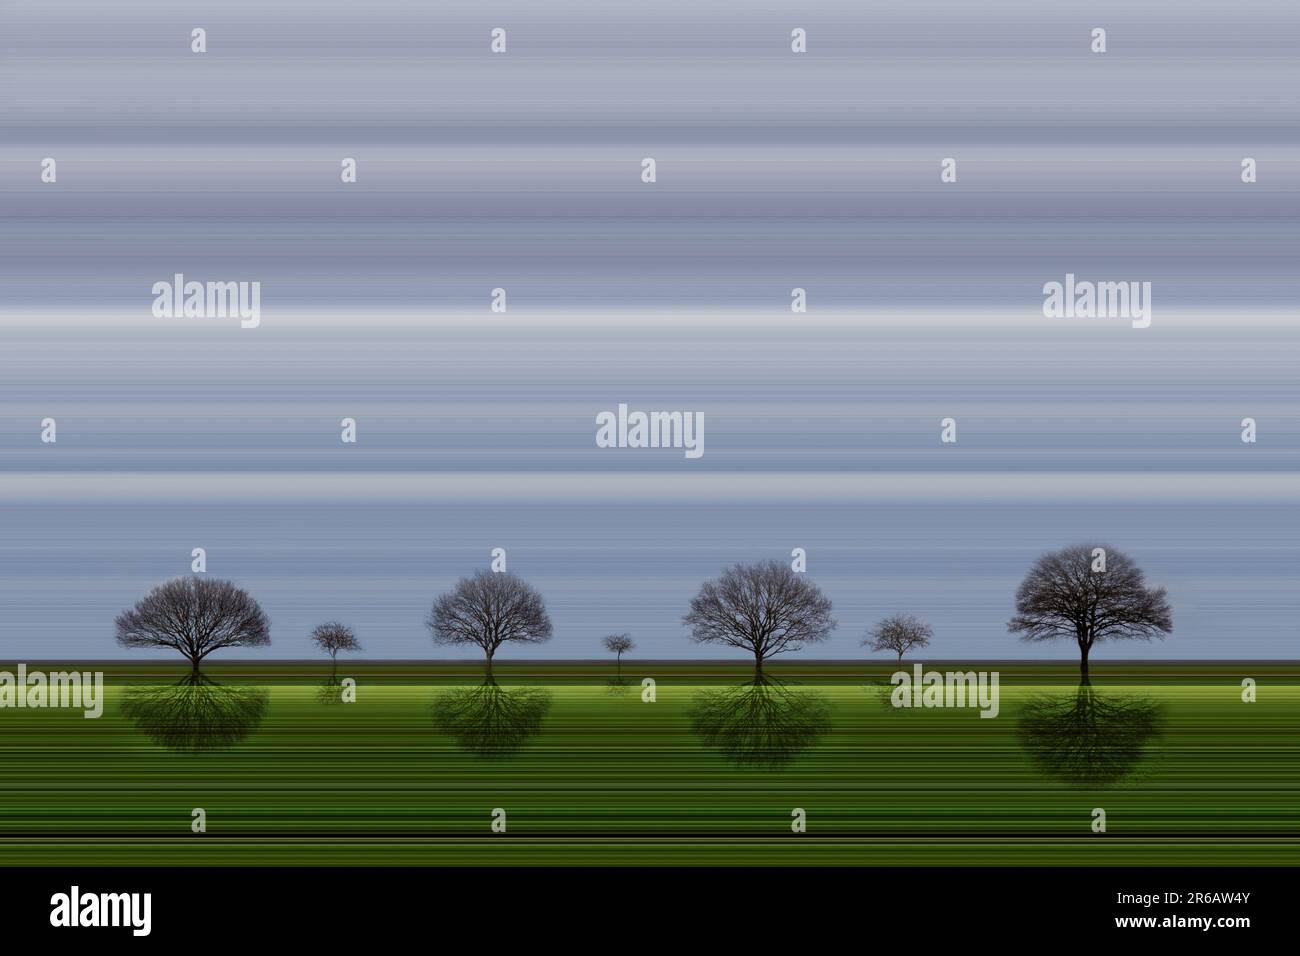 Stylised abstract image of 7 trees, 4 large and 3 small, standing on a green horizon, suggests growth or creating new ideas. Includes space for text. Stock Photo